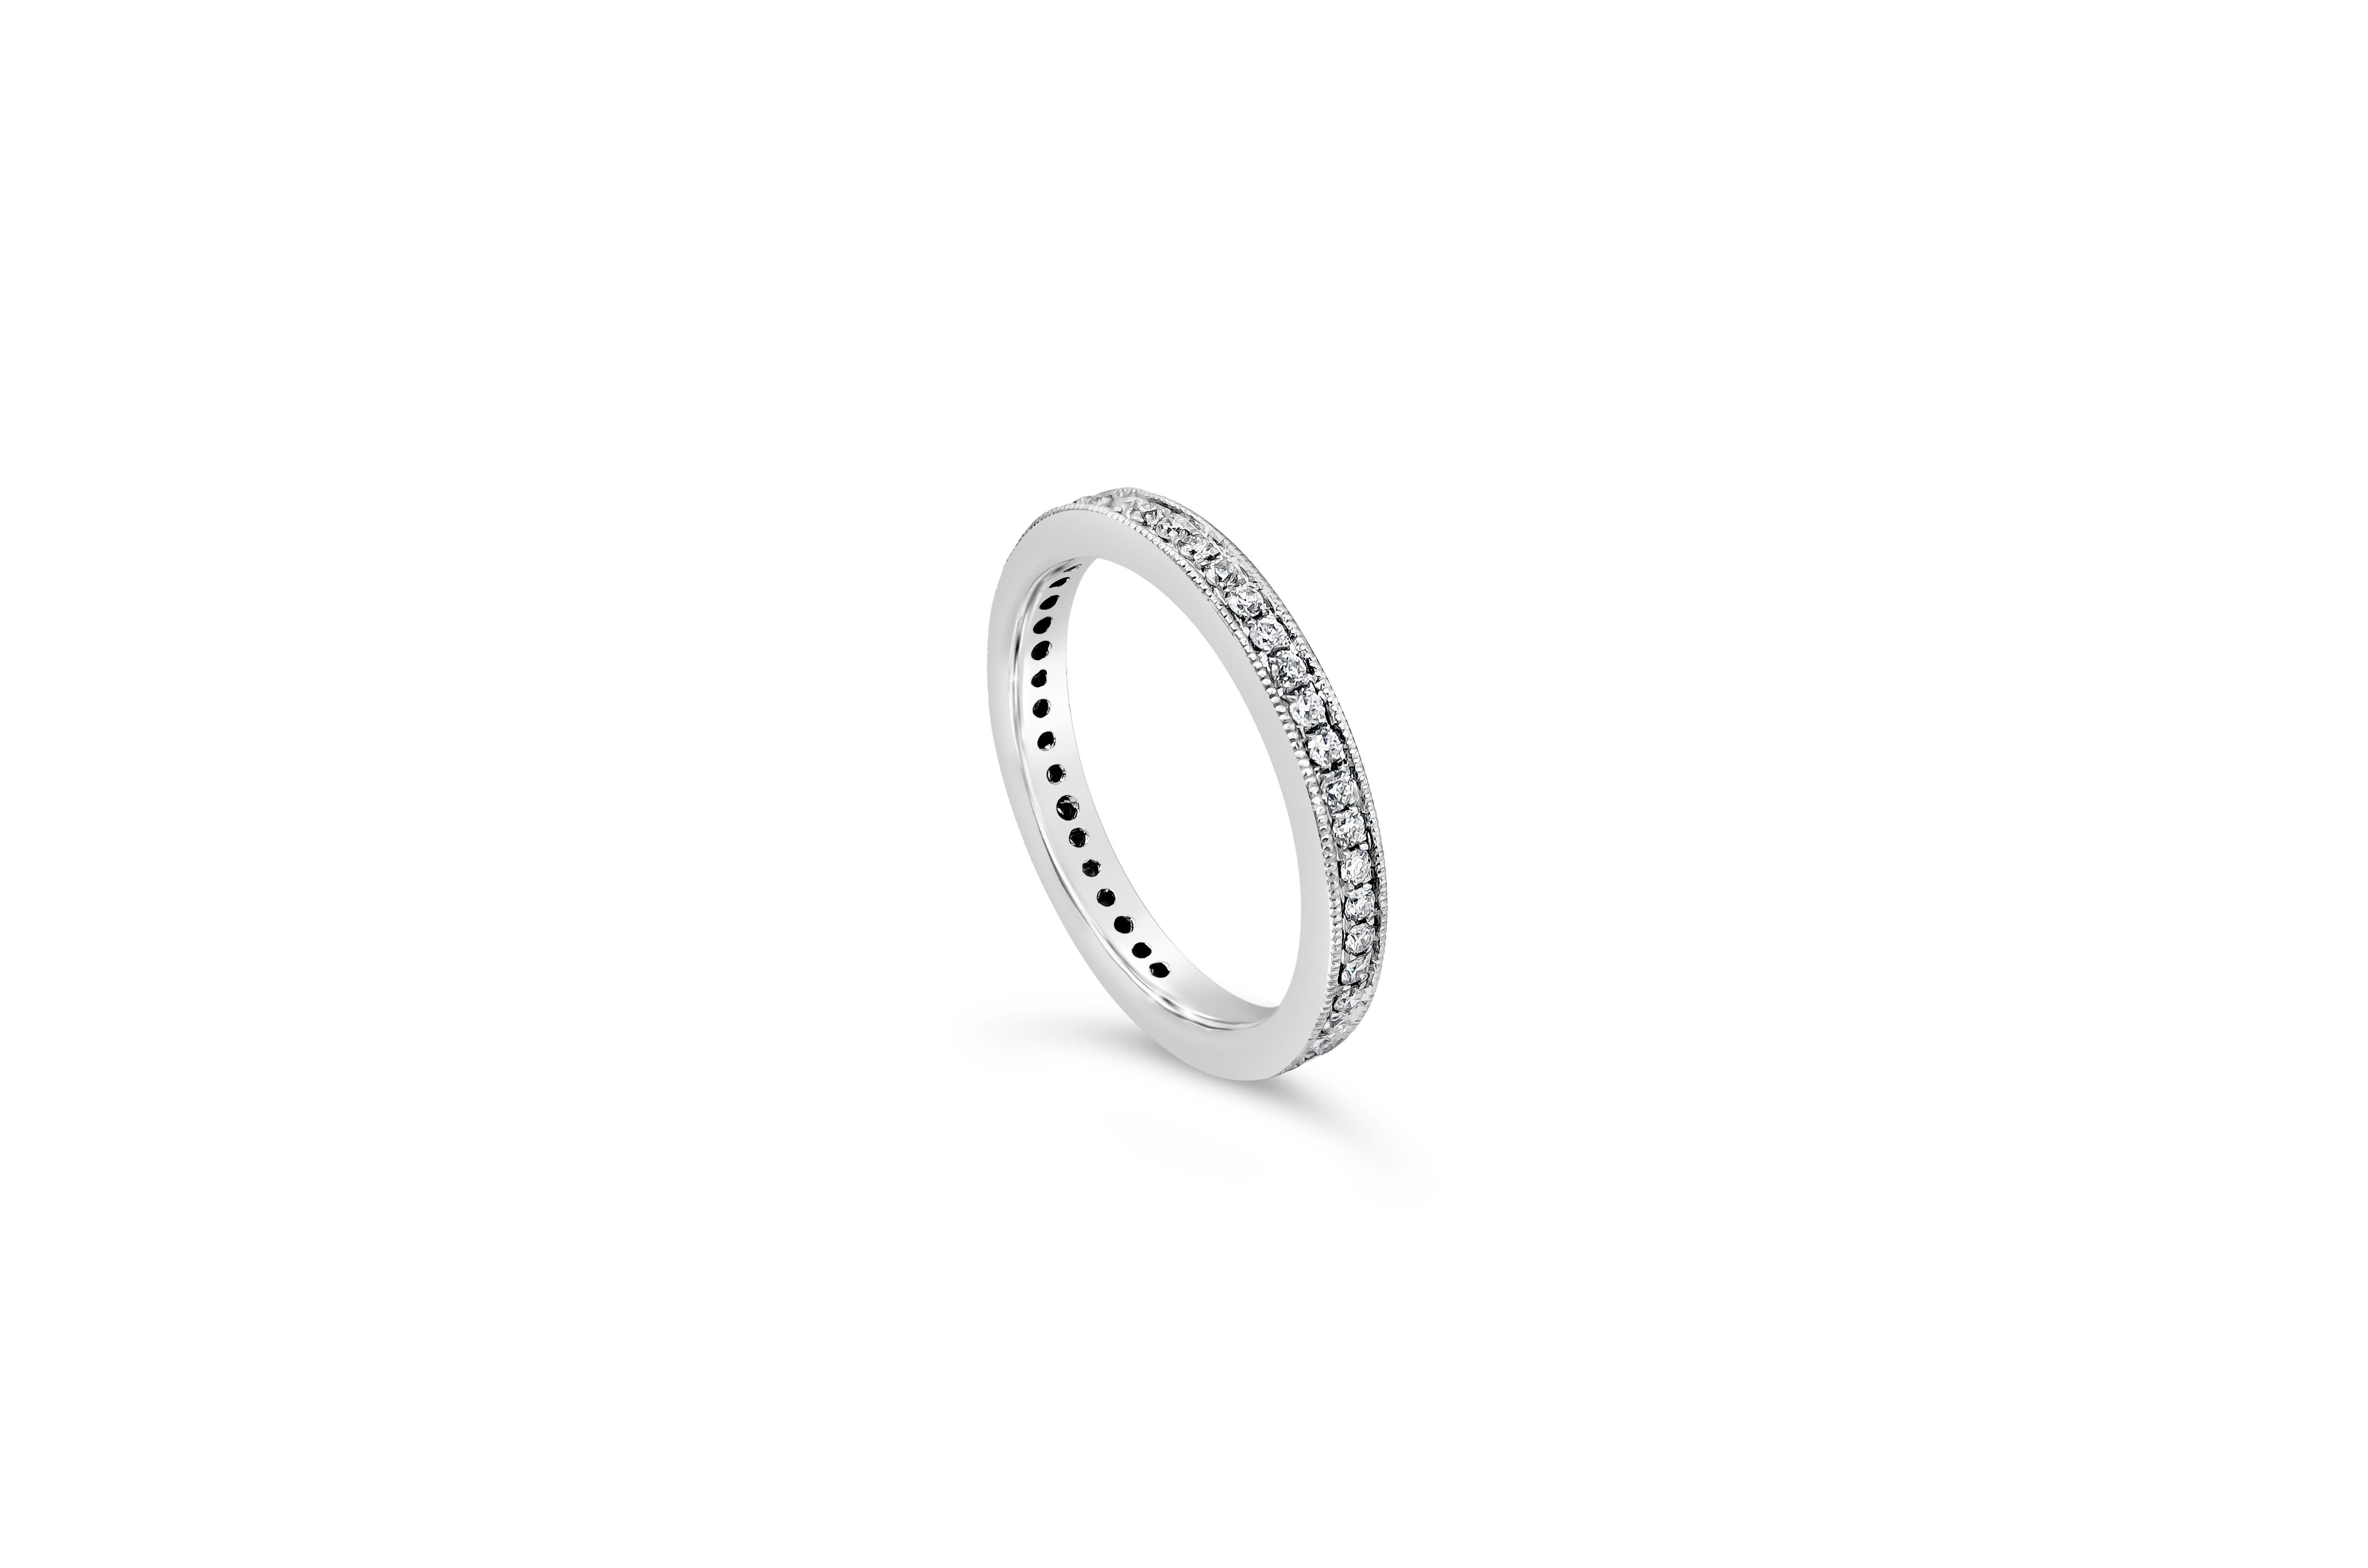 A classic and timeless eternity wedding band style features brilliant round diamonds weighing 0.36 carats.Channel-set and finished with intricate milgrain edges and a hand-engraved design. Finely made in 18K White Gold, Size 6.5 US resizable upon